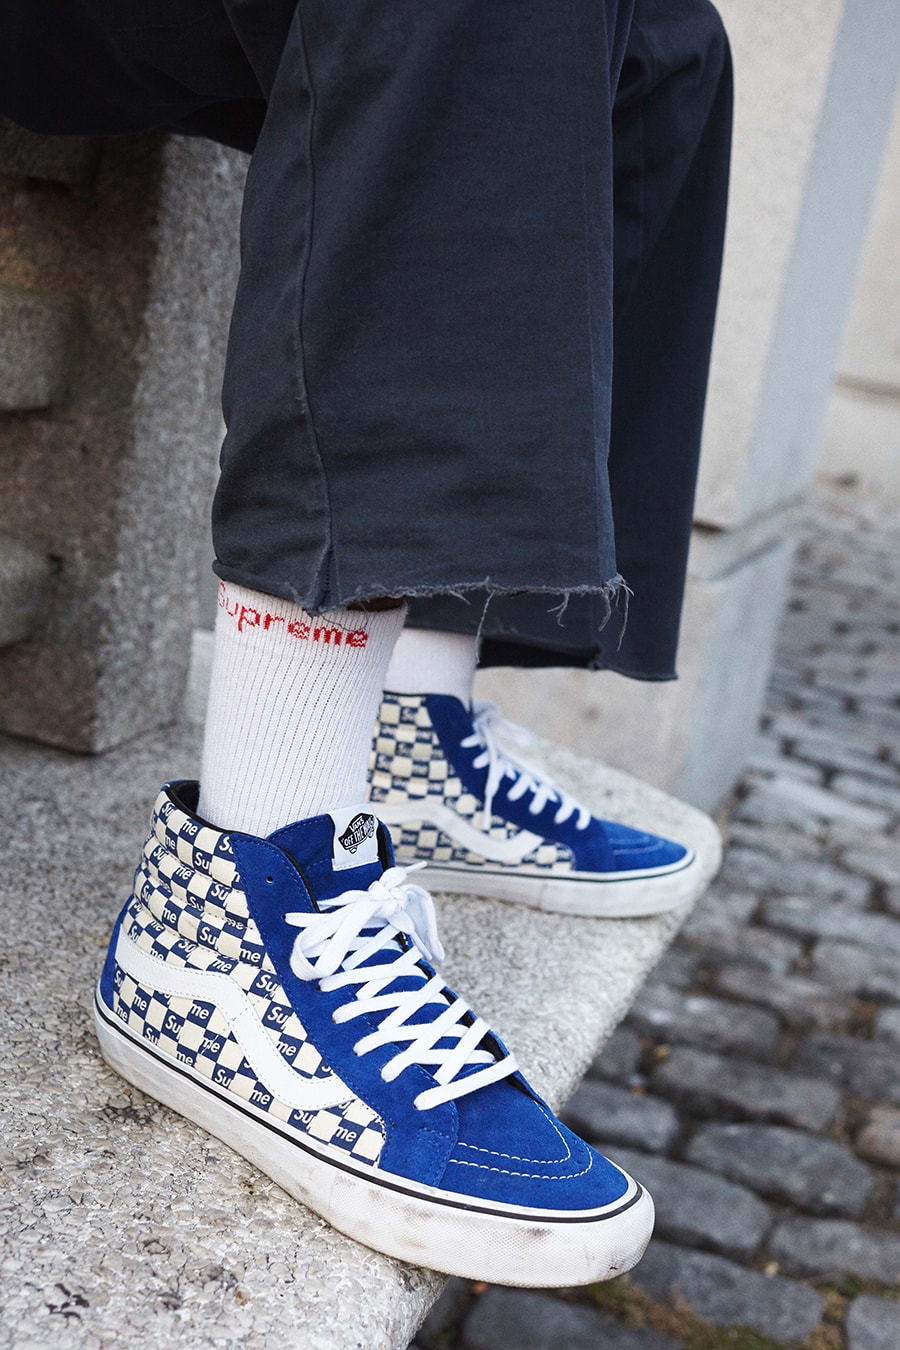 Supreme Vans 2016 Sk8-Hi Pro Authentic blue black red suede canvas Fall winter Collection